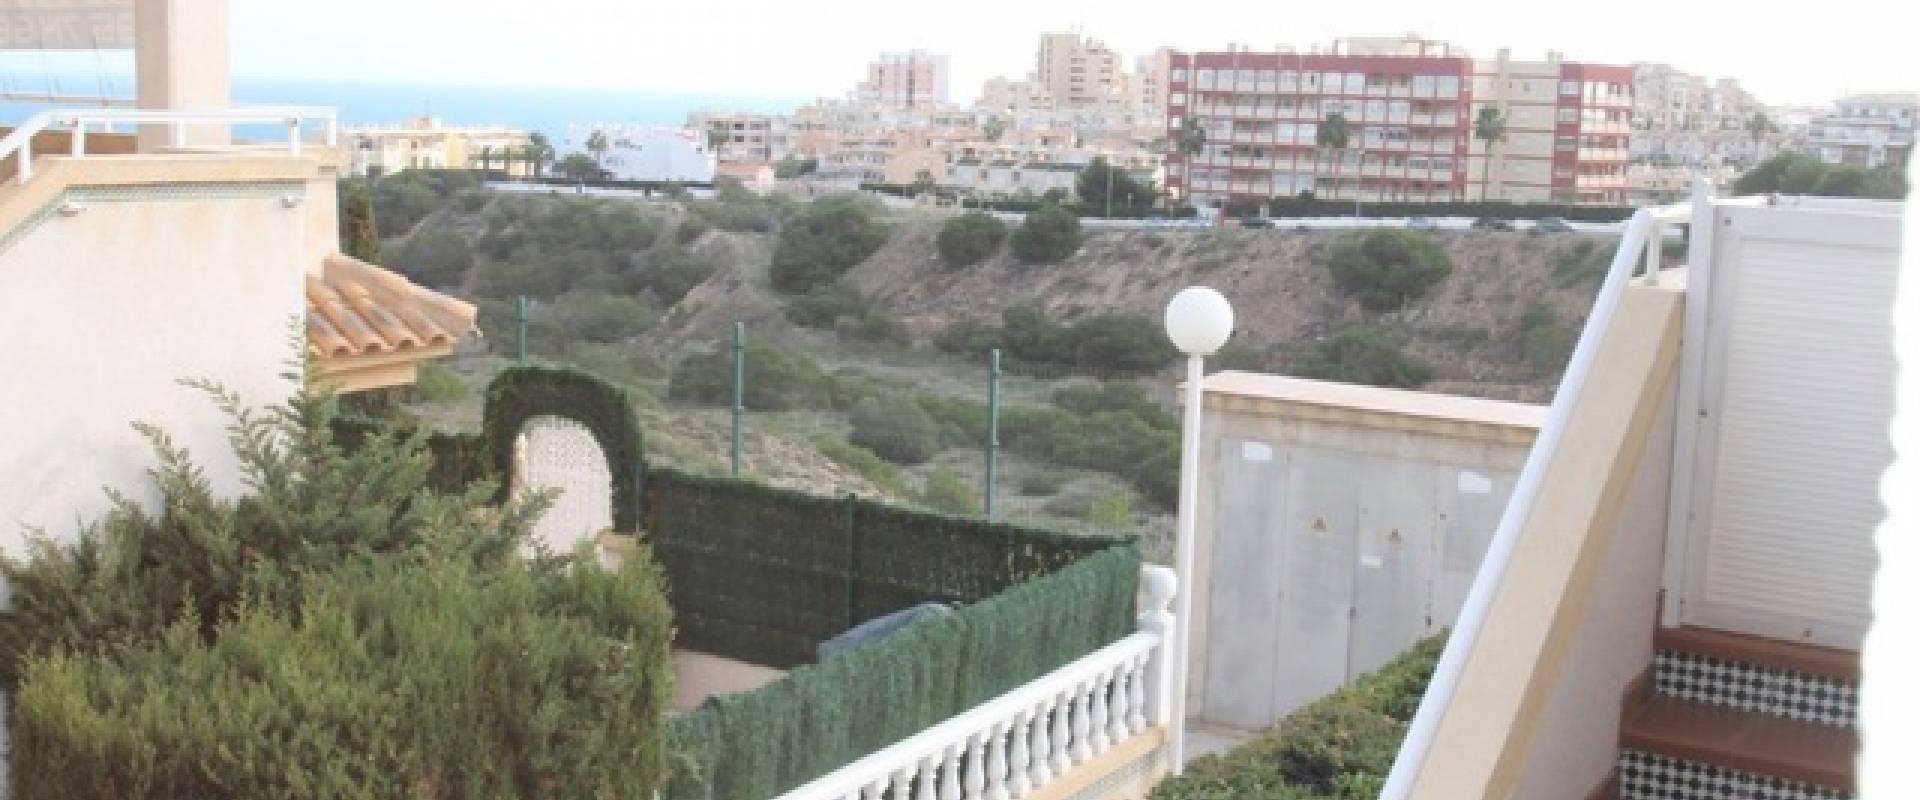 Apartment In Torrevieja